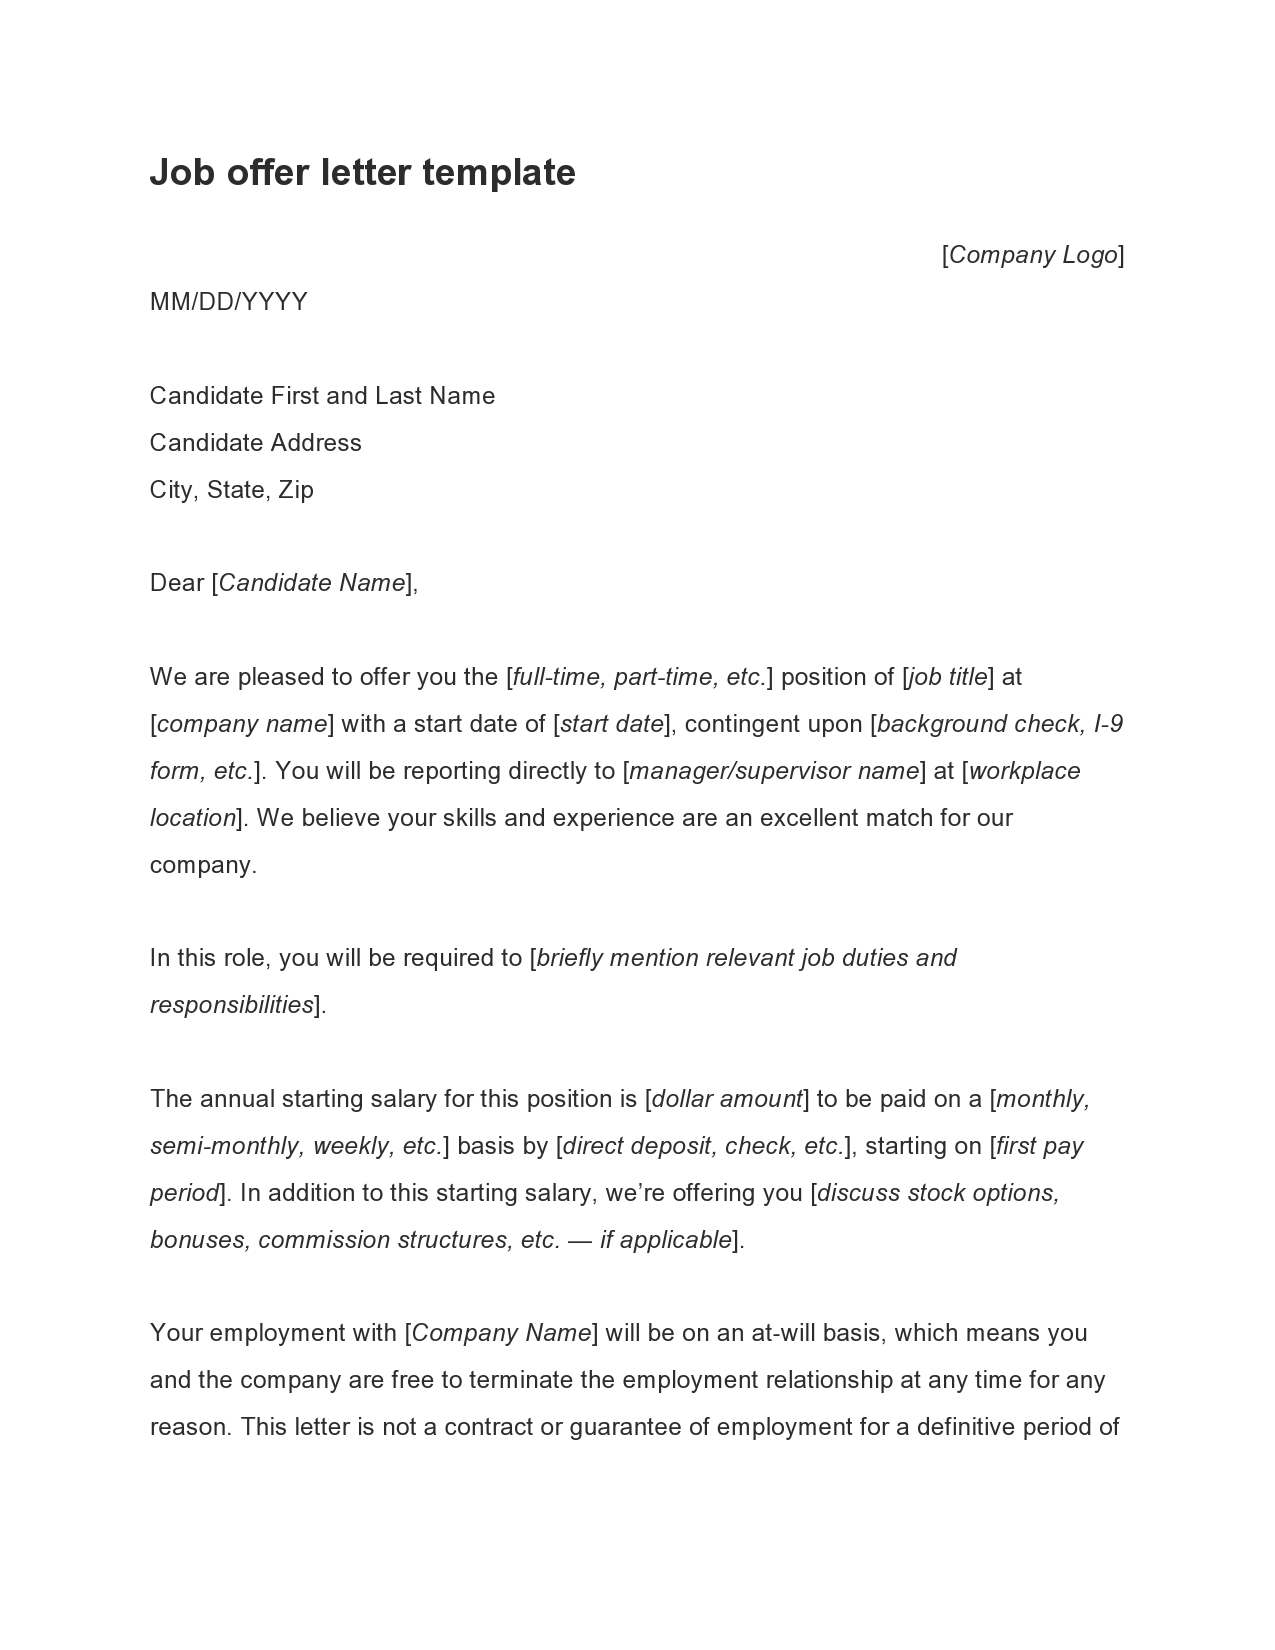 Free employment offer letter template 03